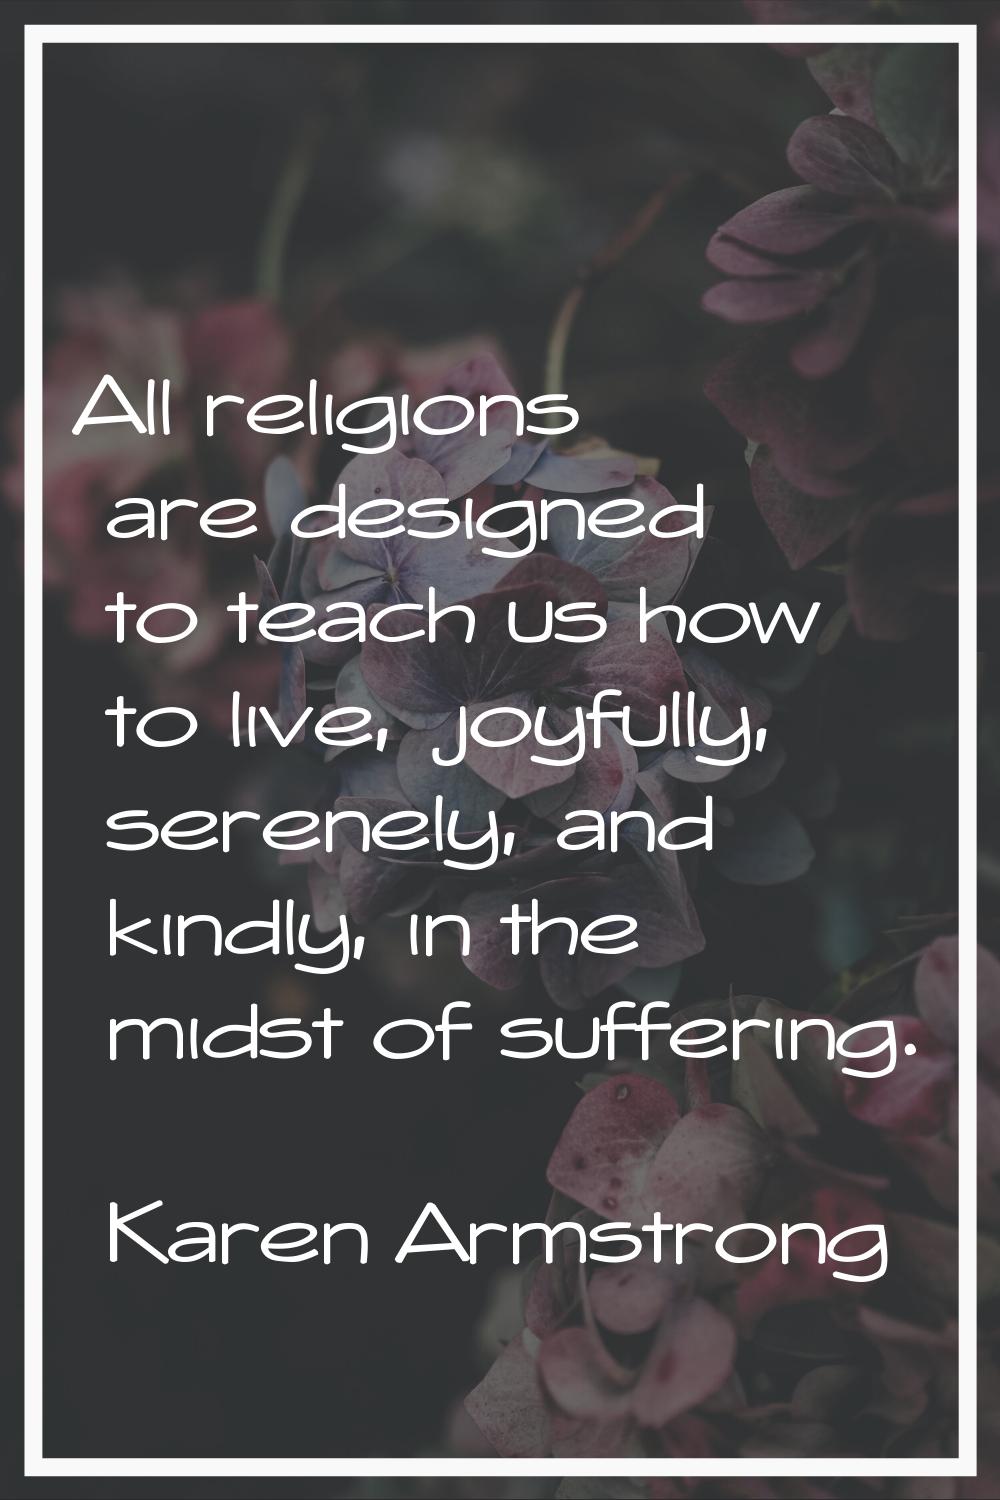 All religions are designed to teach us how to live, joyfully, serenely, and kindly, in the midst of